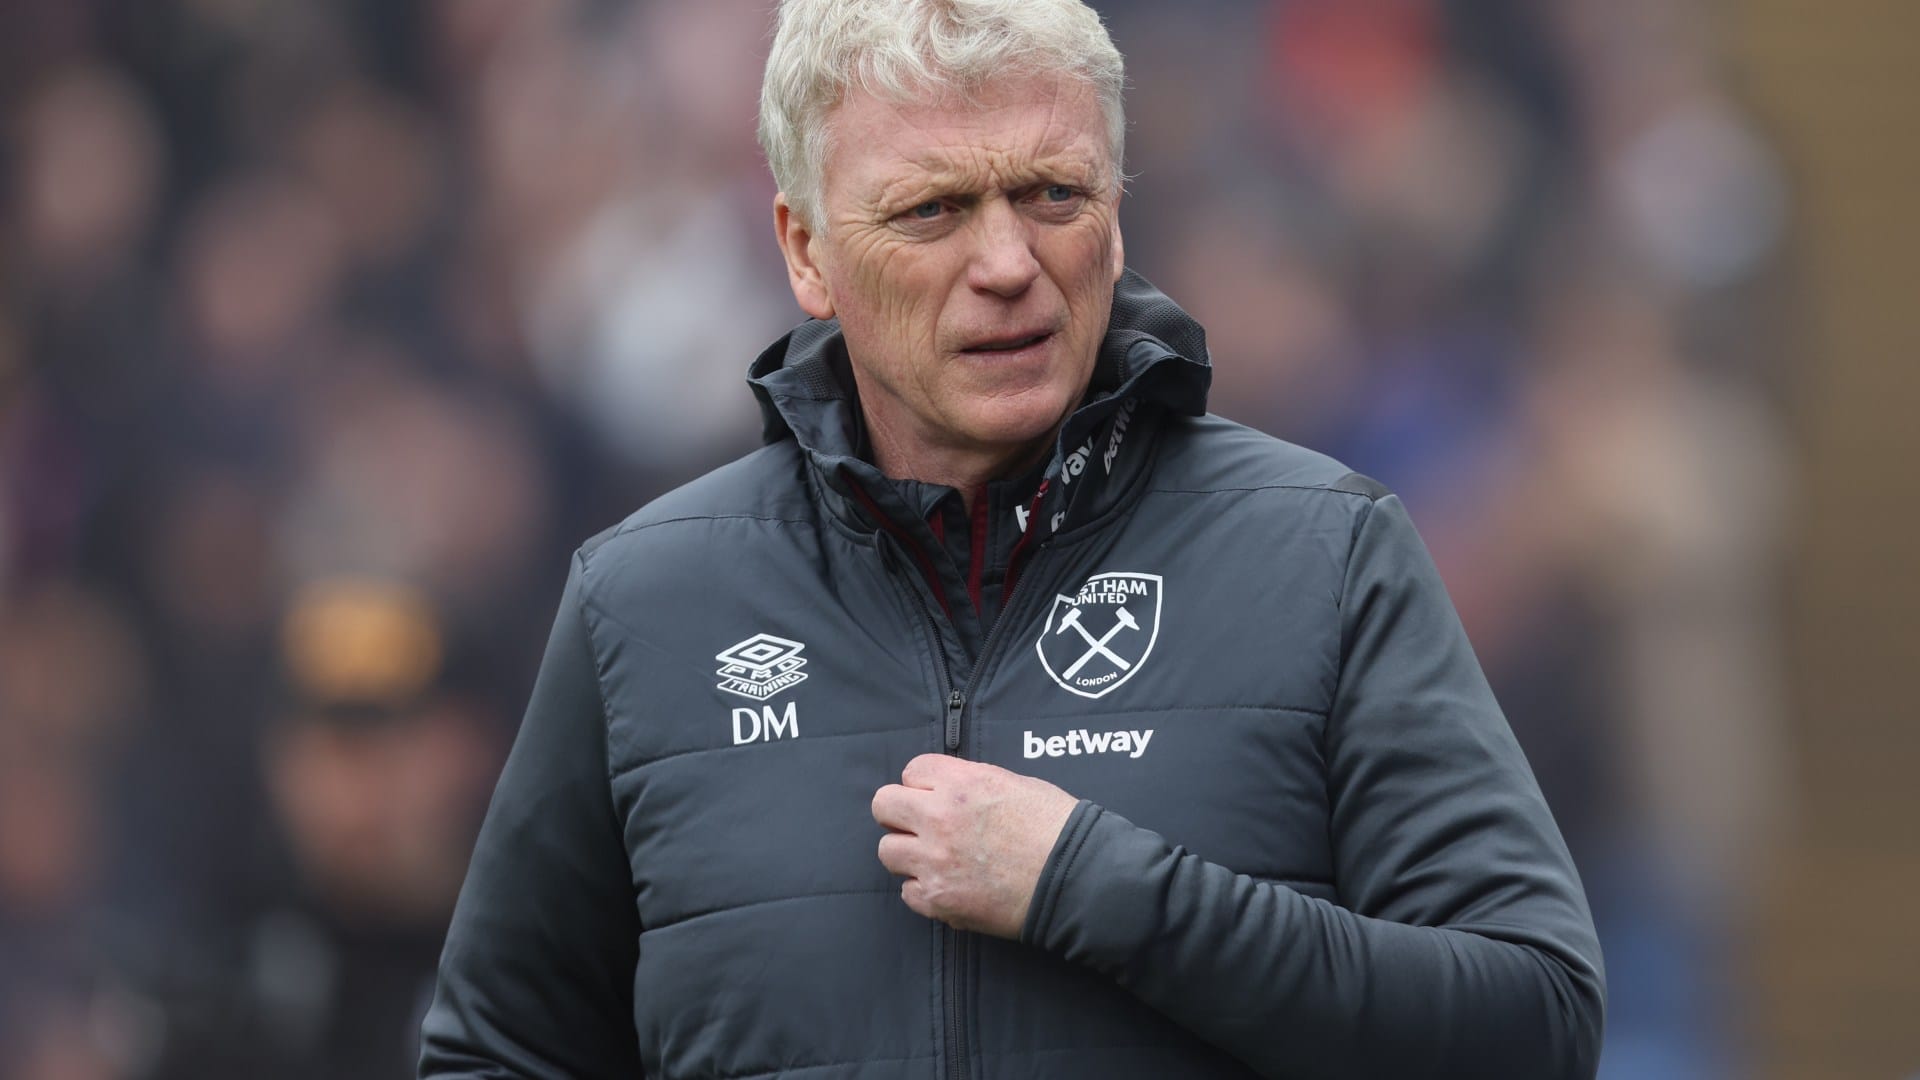 David Moyes lands new job just days after West Ham announced manager set to leave at end of season